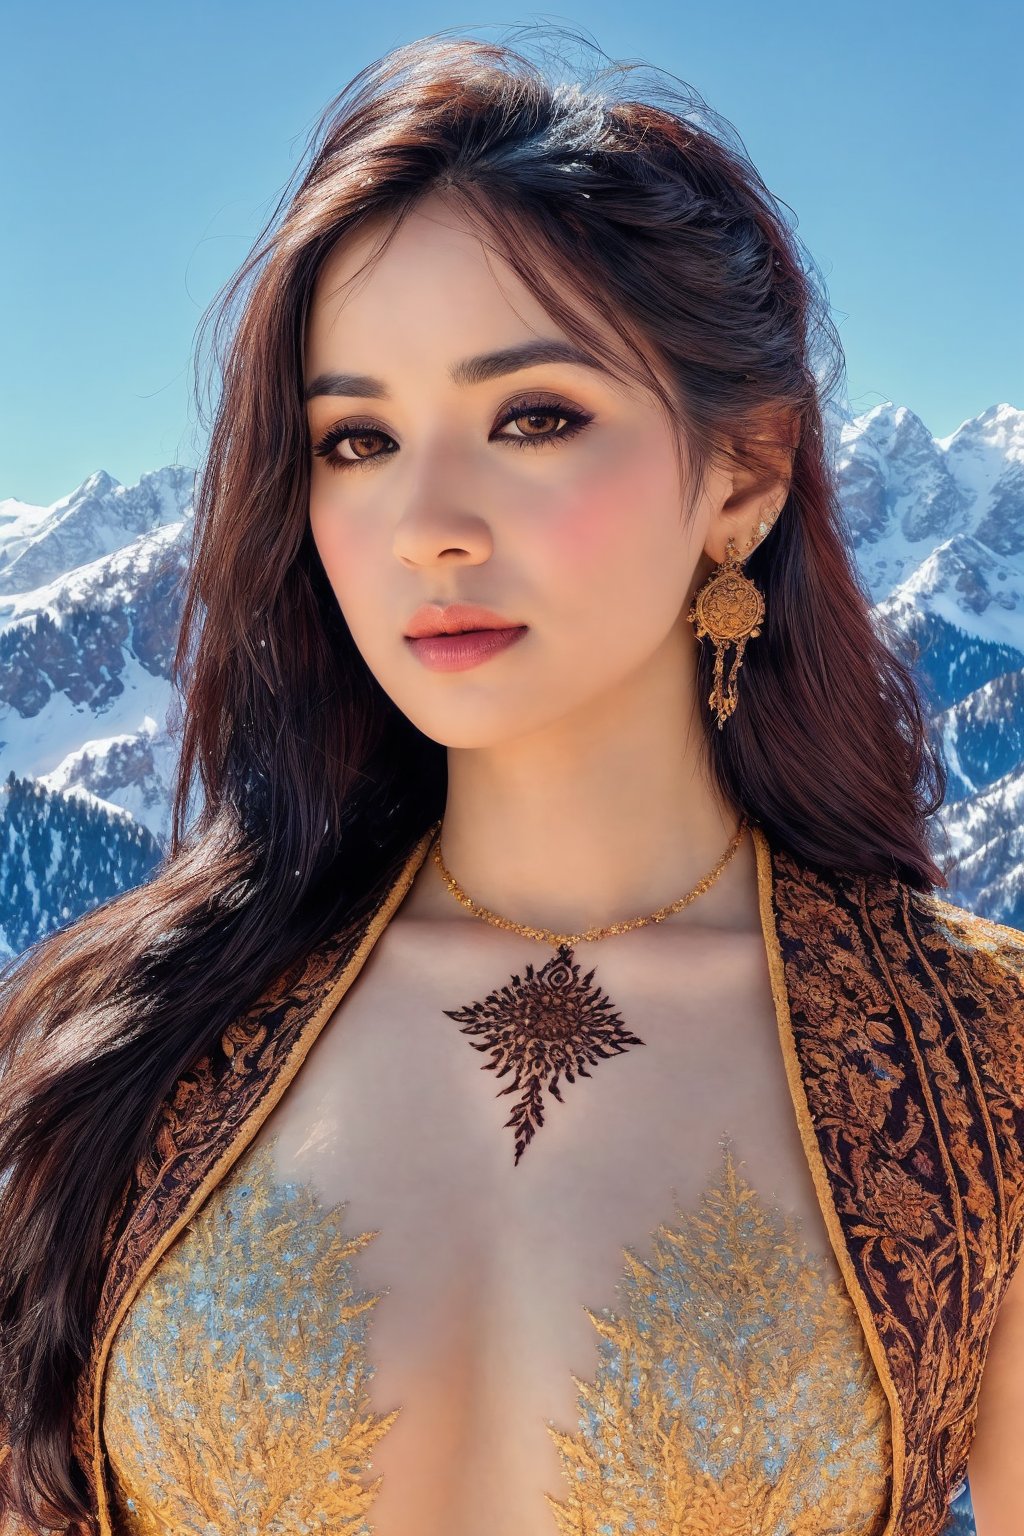 majestic portrait of a woman adorned with intricate henna designs, her gaze fixed on a soaring hawk against a backdrop of snow-capped mountains. Capture the strength and determination in her eyes, mirroring the power and resilience of the natural world.
 
